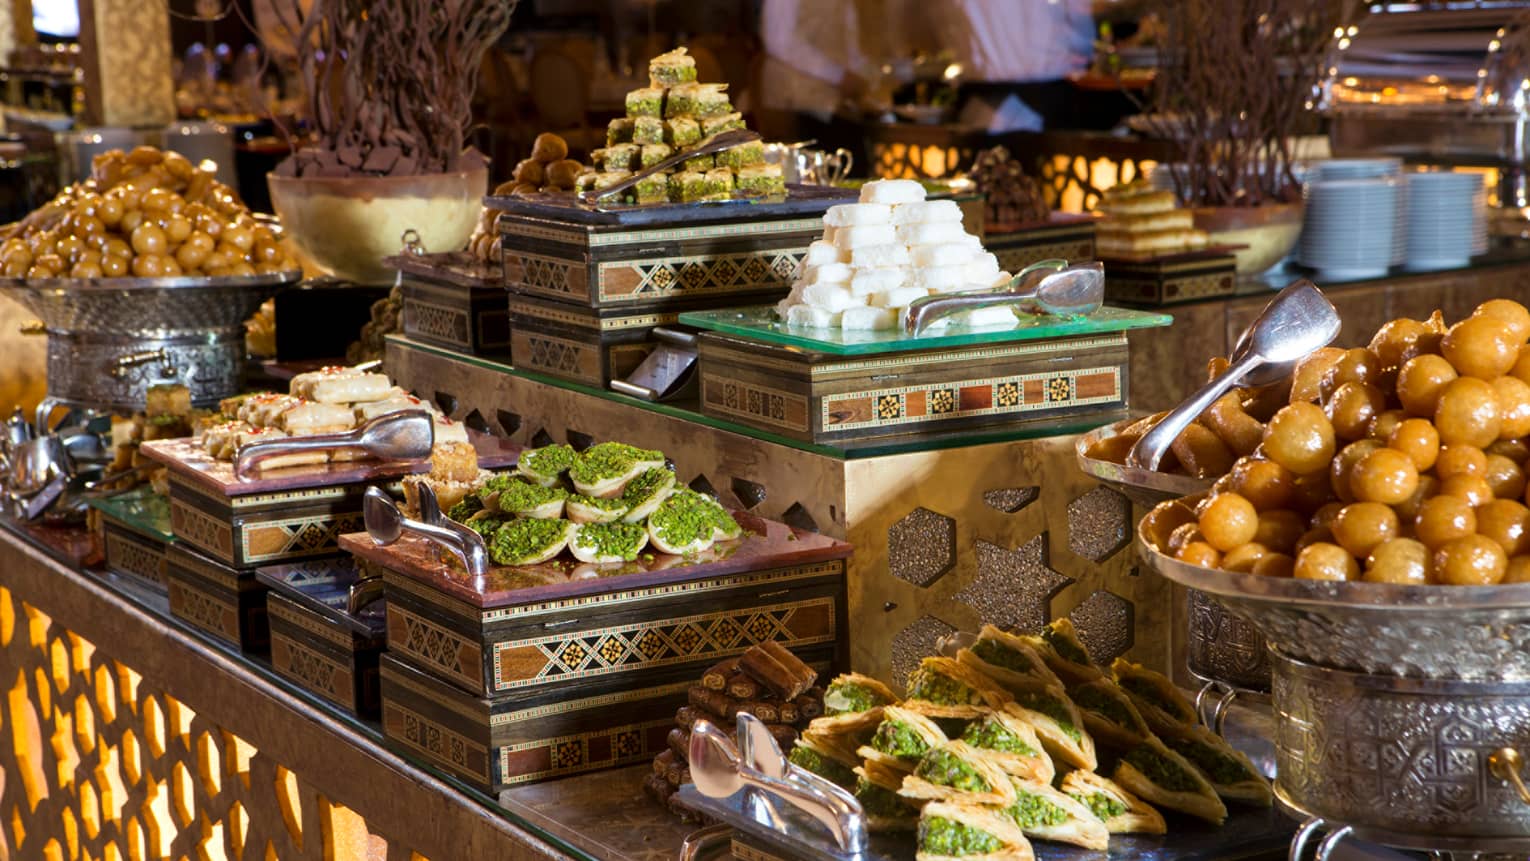 Middle Eastern meze small plates, pastries and sweets on platters on decorative brunch buffet display